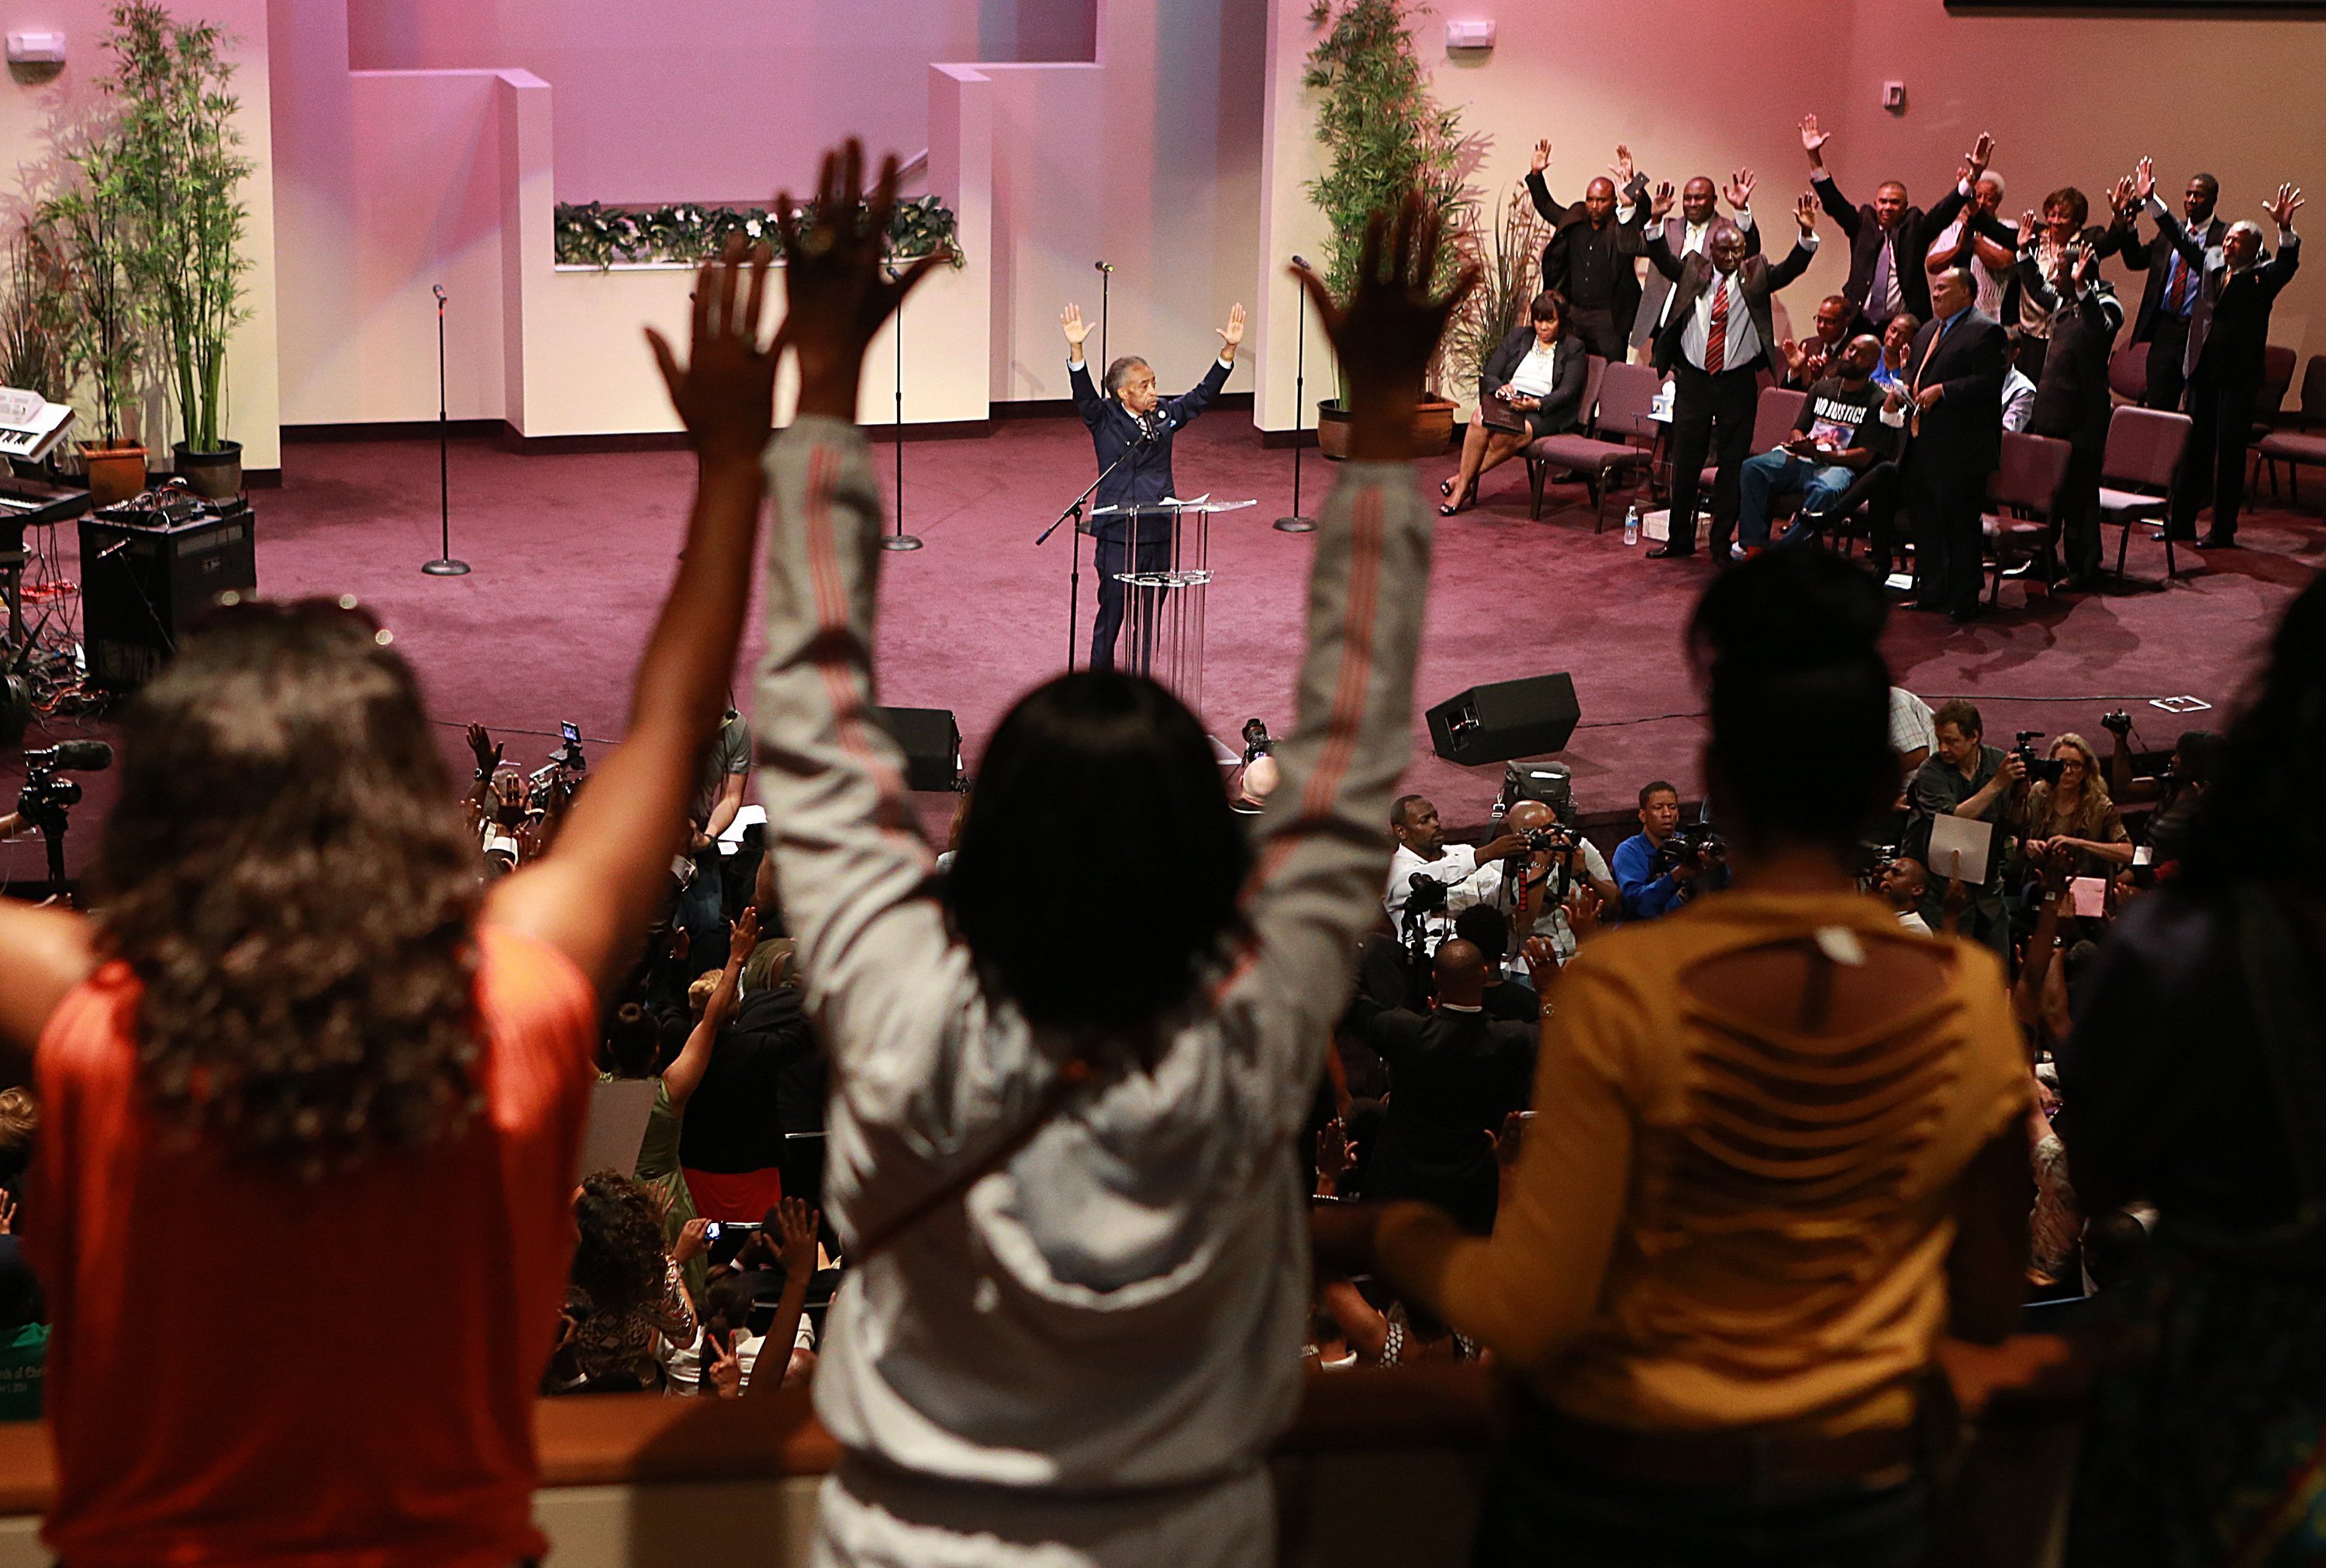 Rev. Al Sharpton speaks during a rally for justice for Michael Brown at Greater Grace Church in Ferguson, Mo., on Aug. 17, 2014. (Christian Gooden—St. Louis Post-Dispatch/MCT/Sipa)